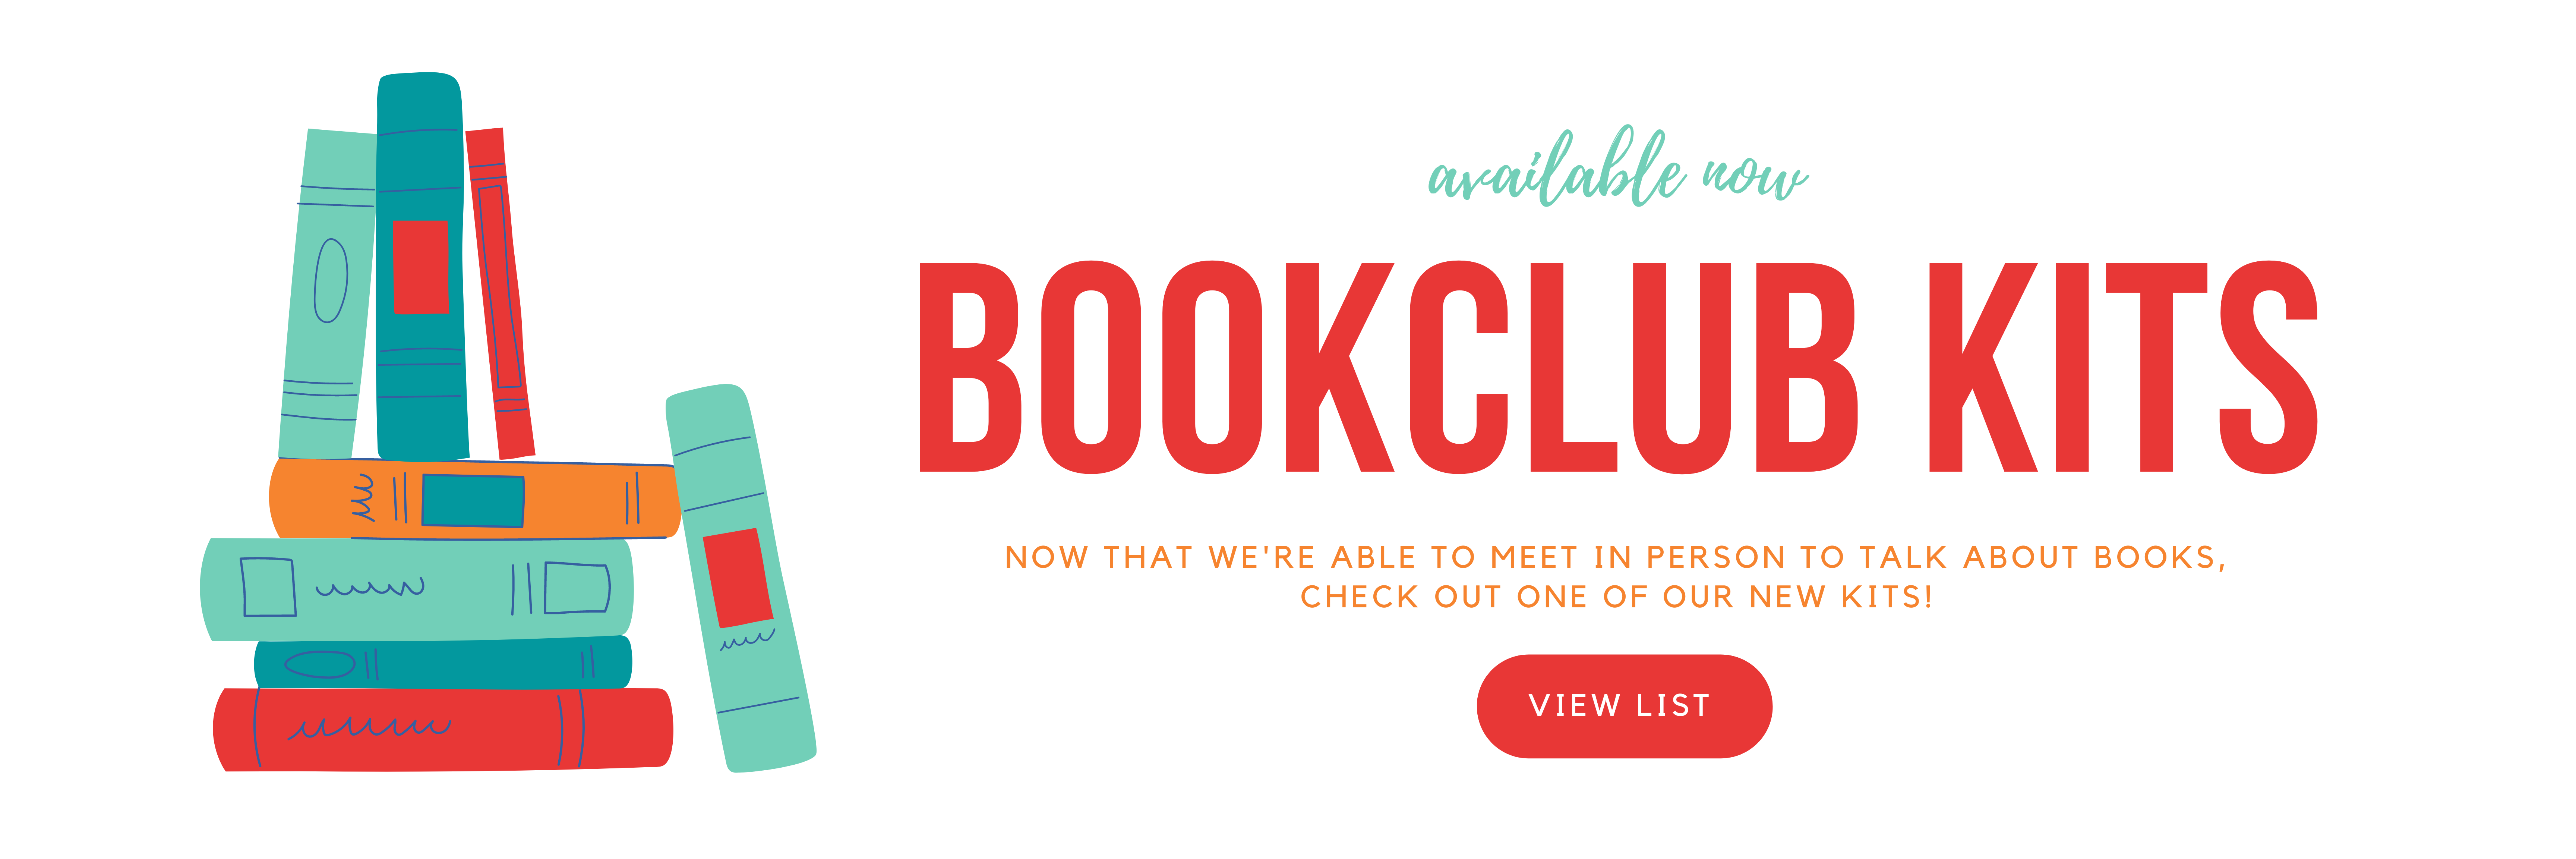 List of book club kits you can check out